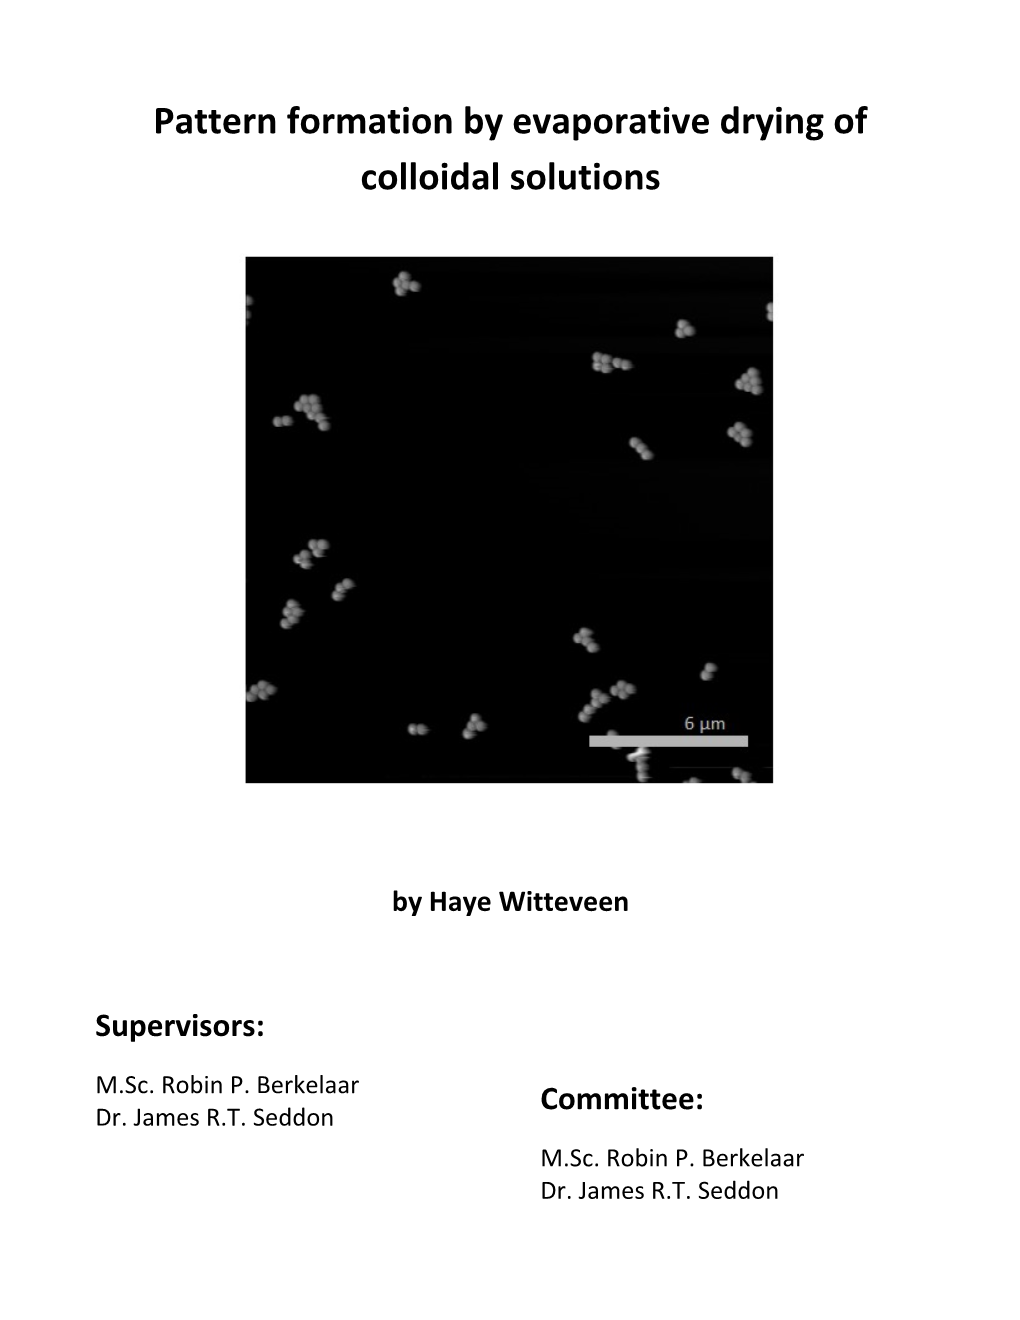 Pattern Formation by Evaporative Drying of Colloidal Solutions